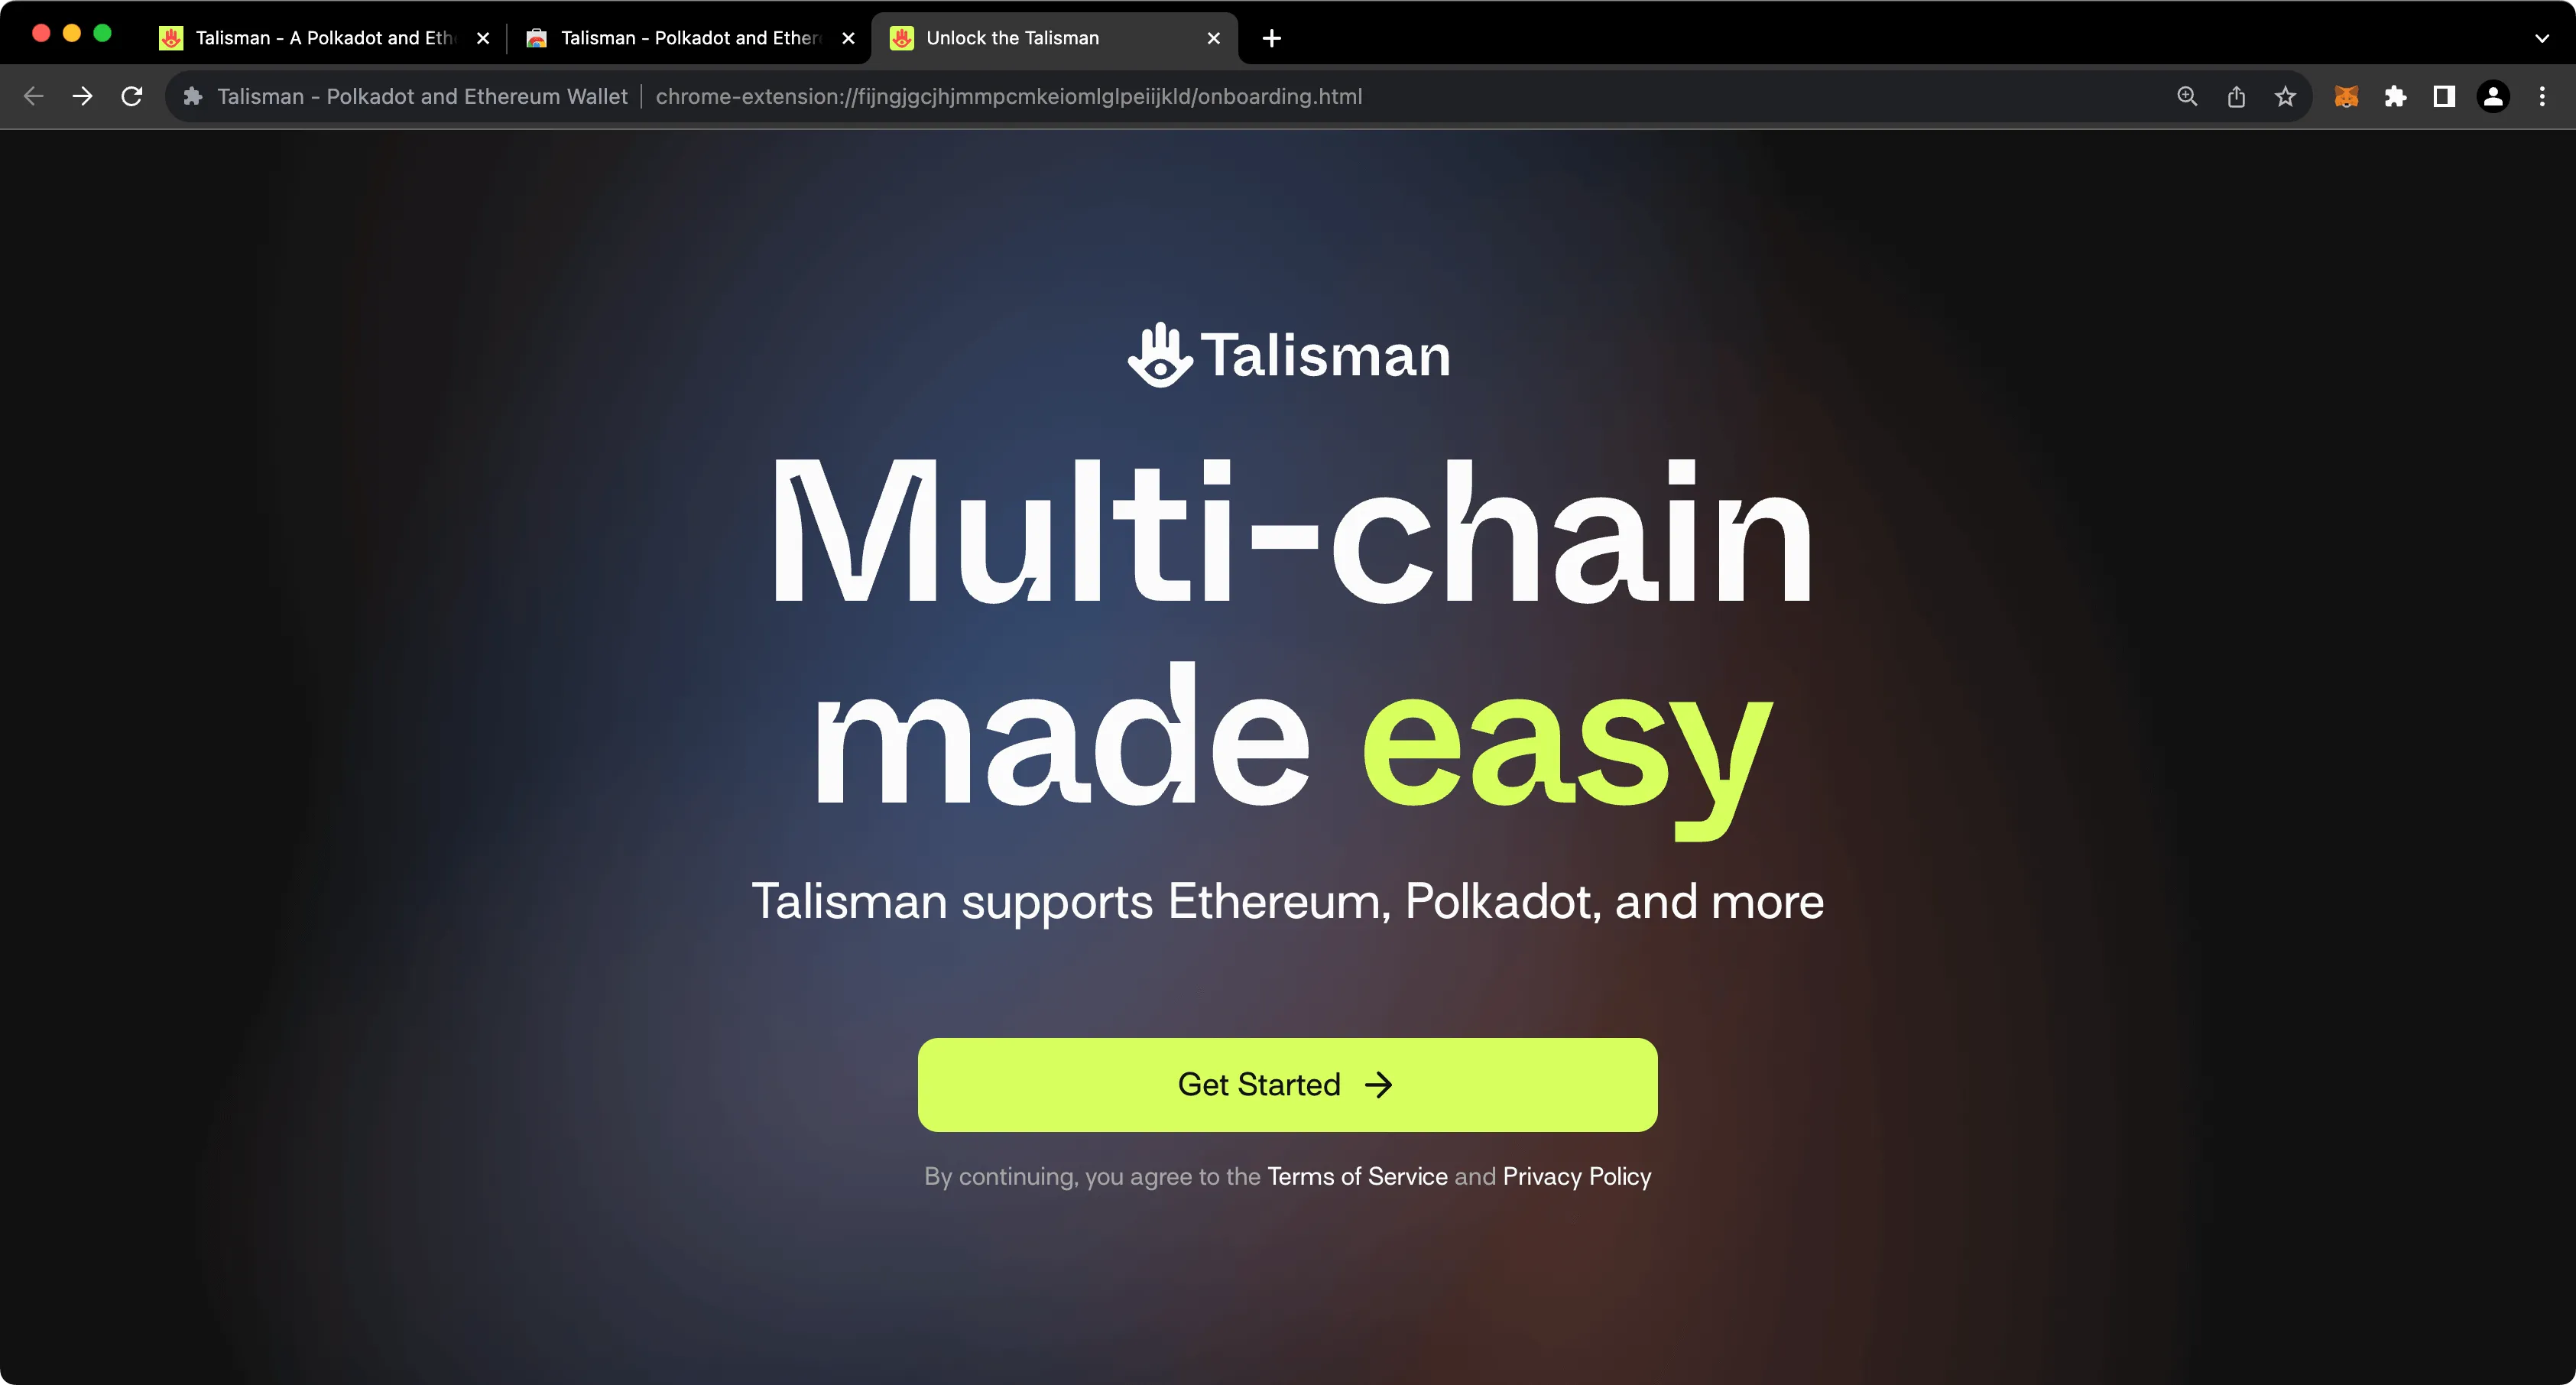 Get started with Talisman